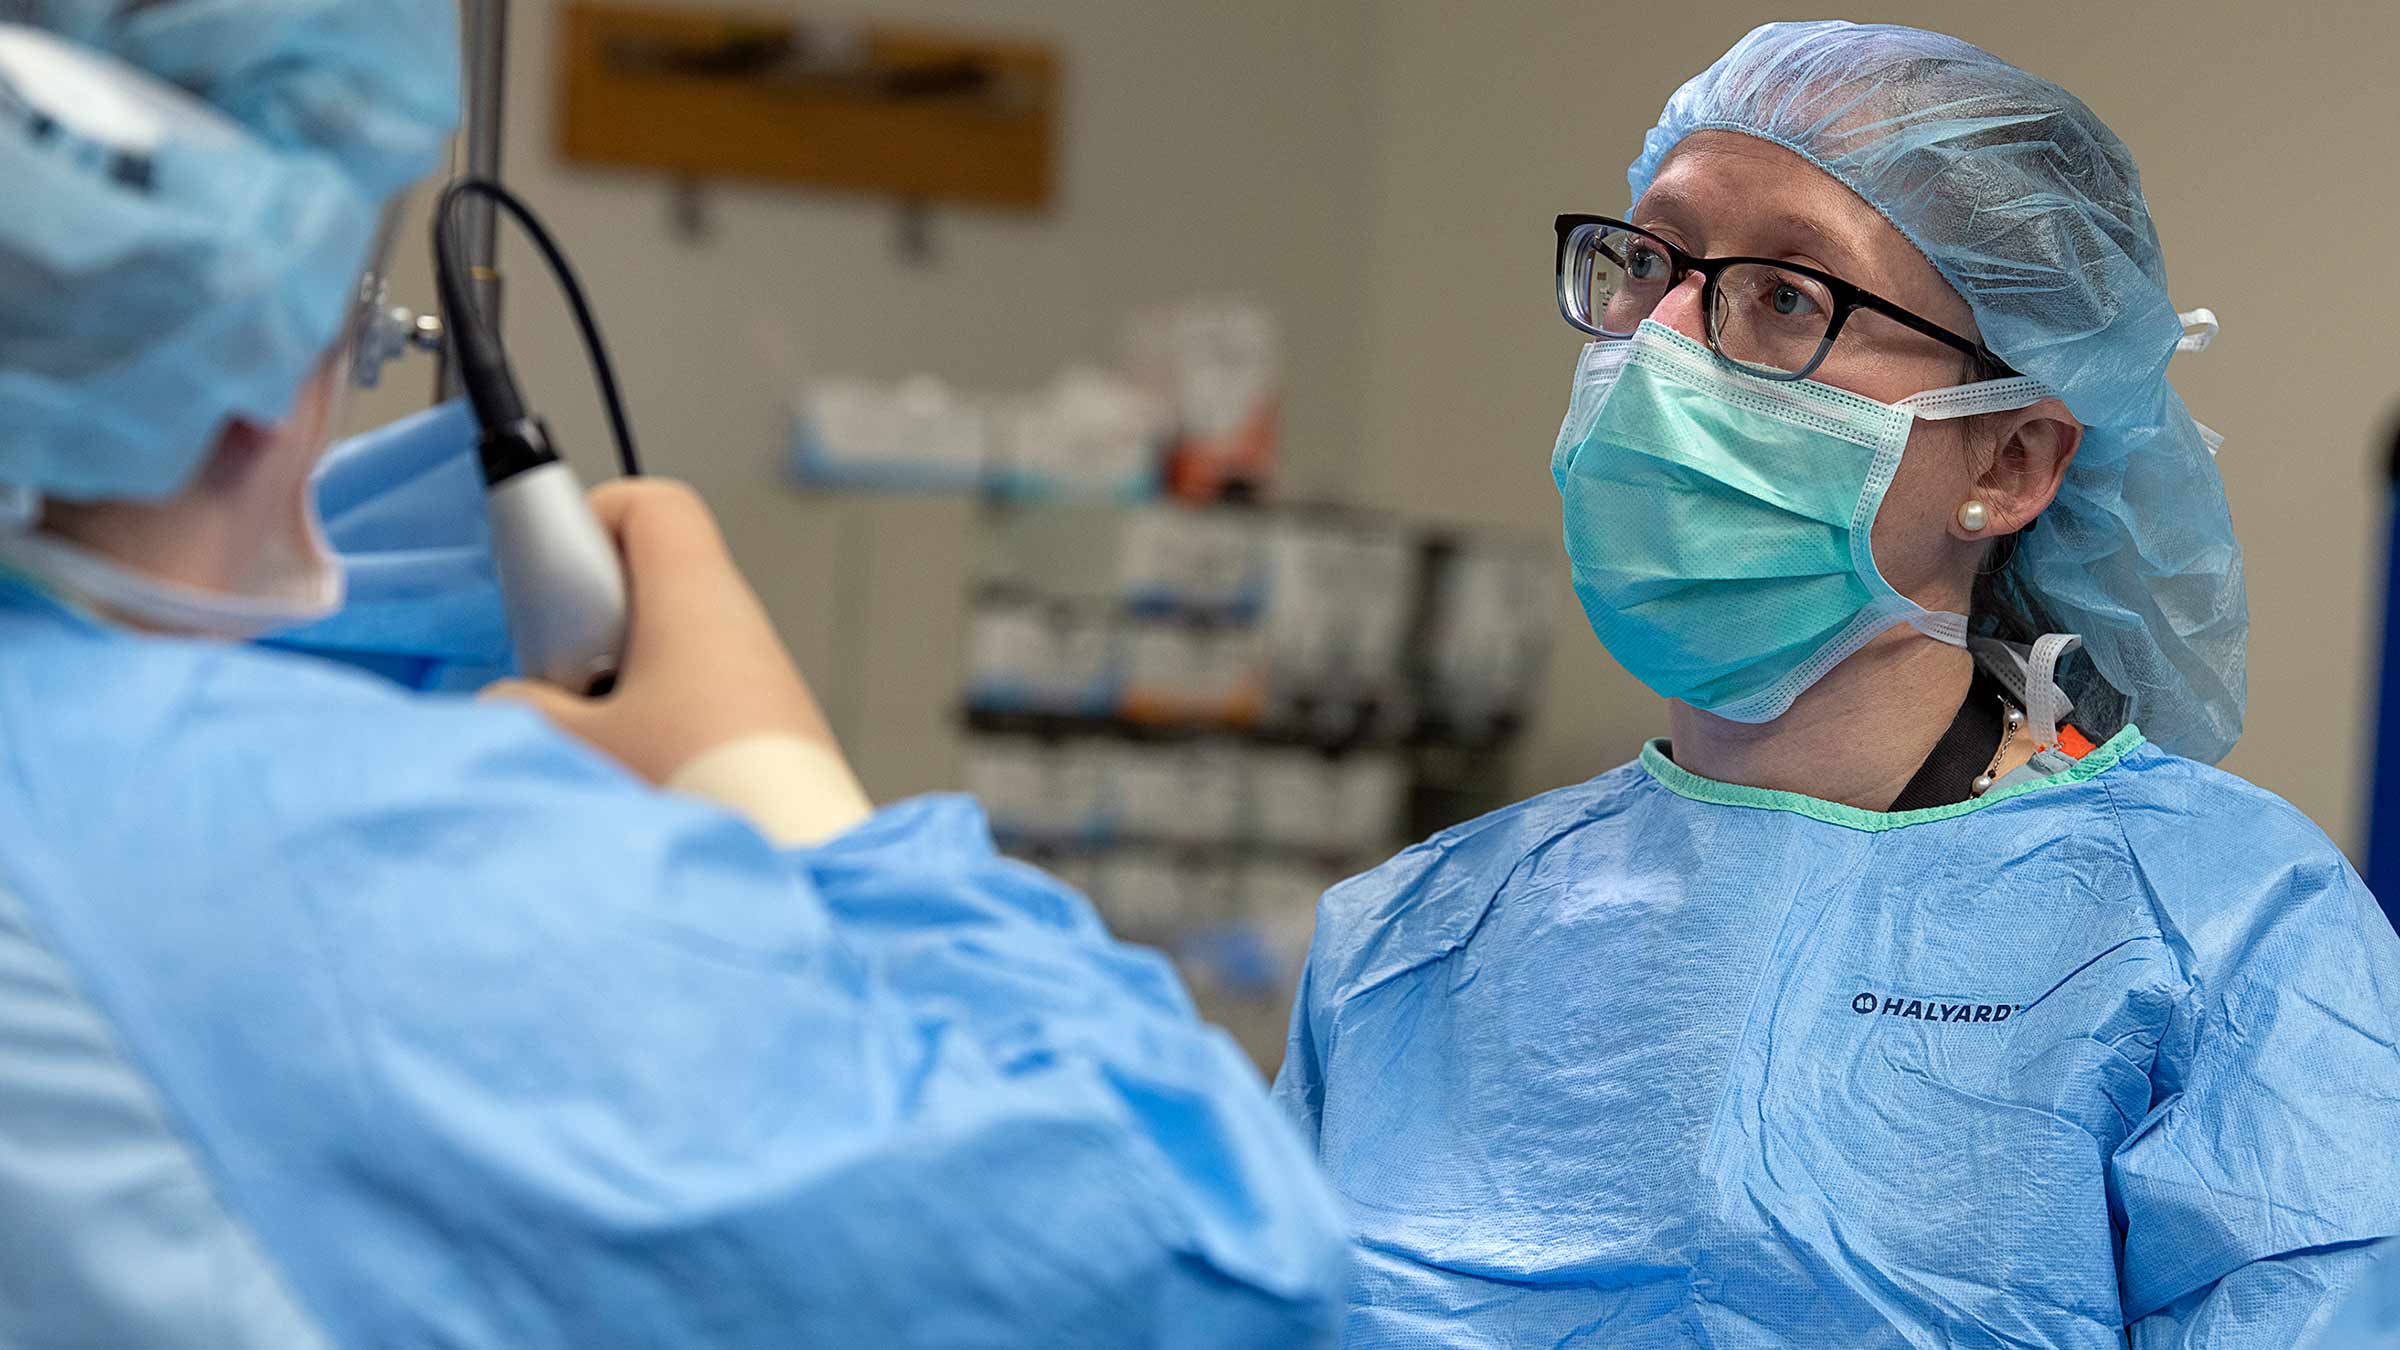 Dr. Dillhoff during surgery